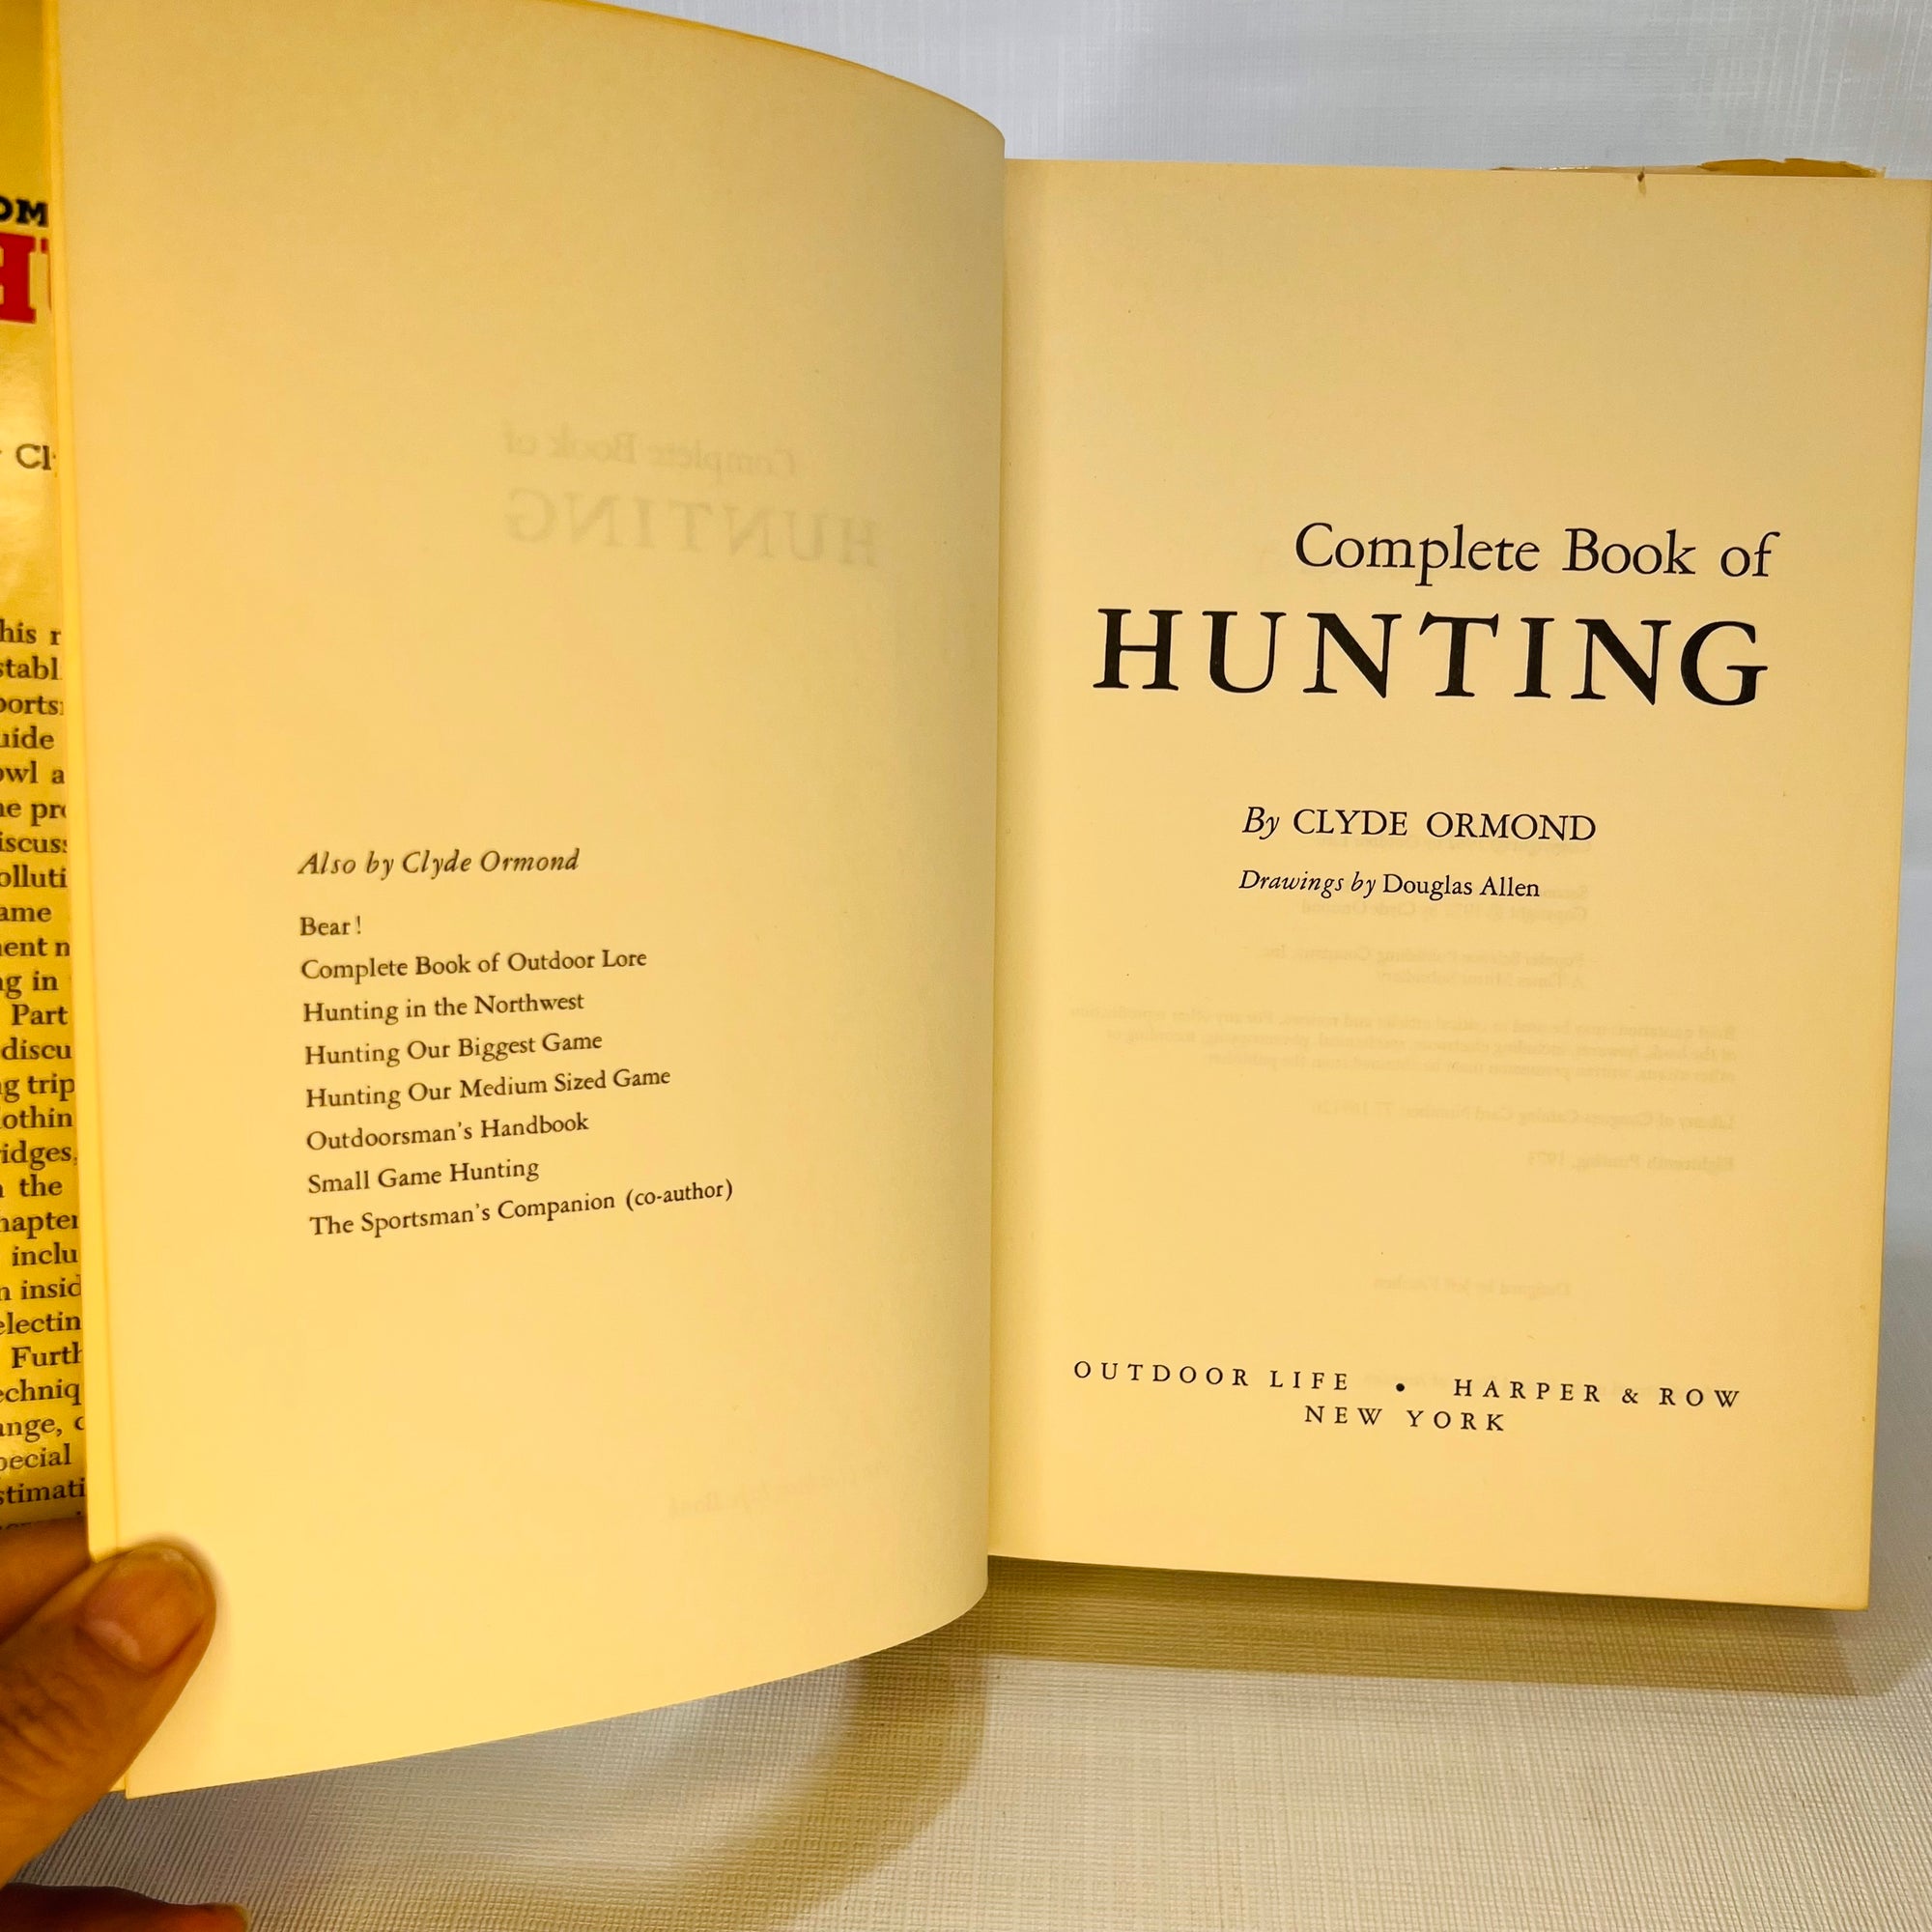 The Complete Book of Hunting by Clyde Ormond 1972 Outdoor Life